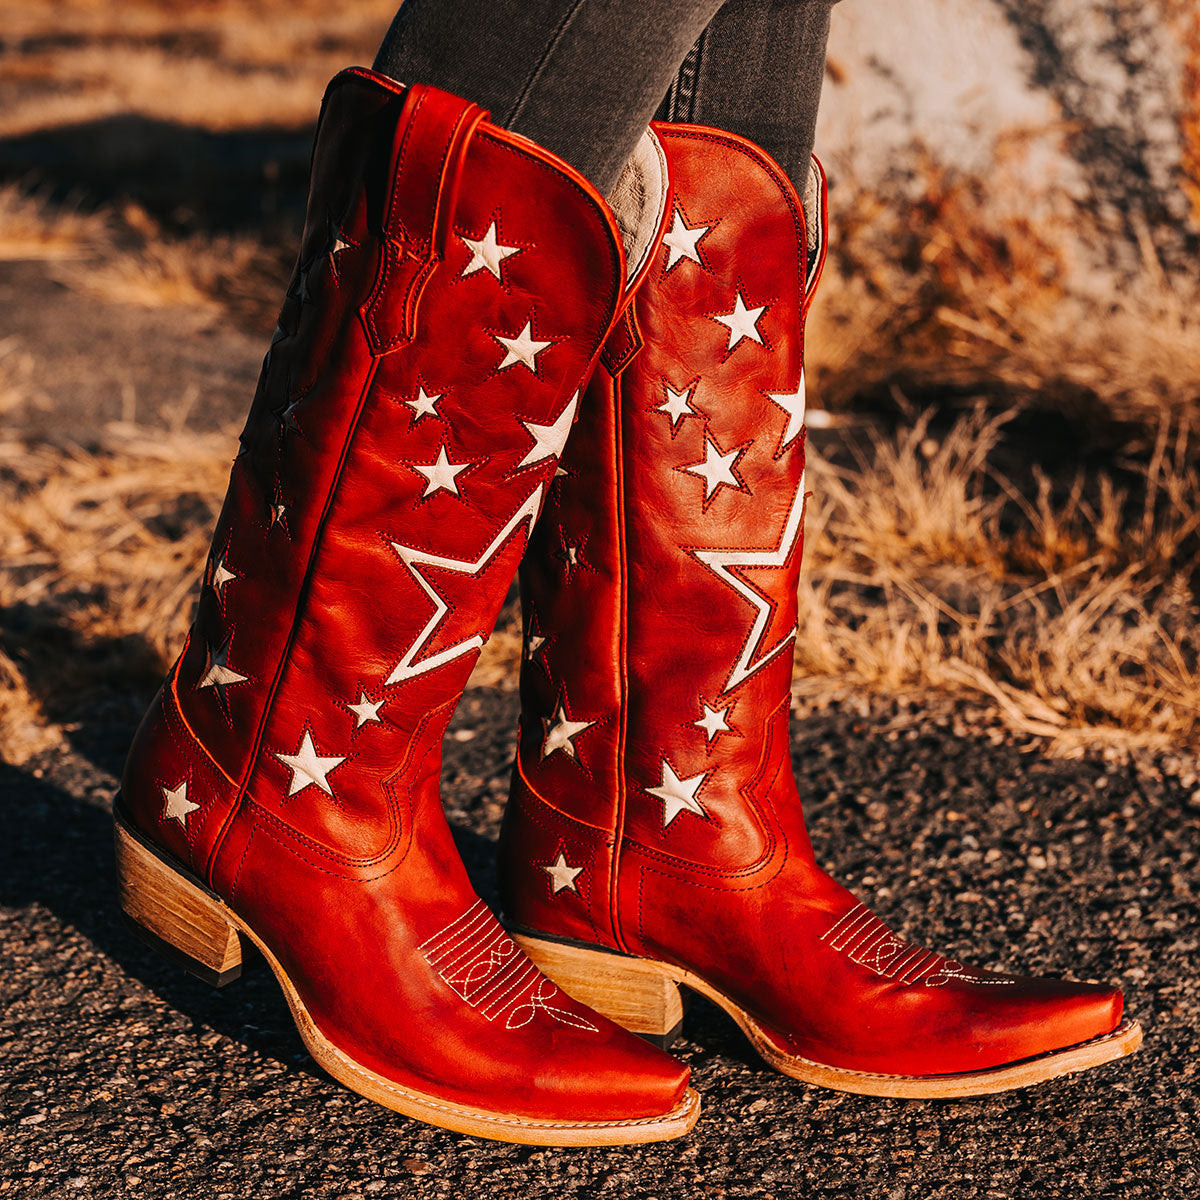 FREEBIRD women's Starzz red multi leather cowboy boot with two-toned leather star inlay detailing traditional stitching and snip toe construction